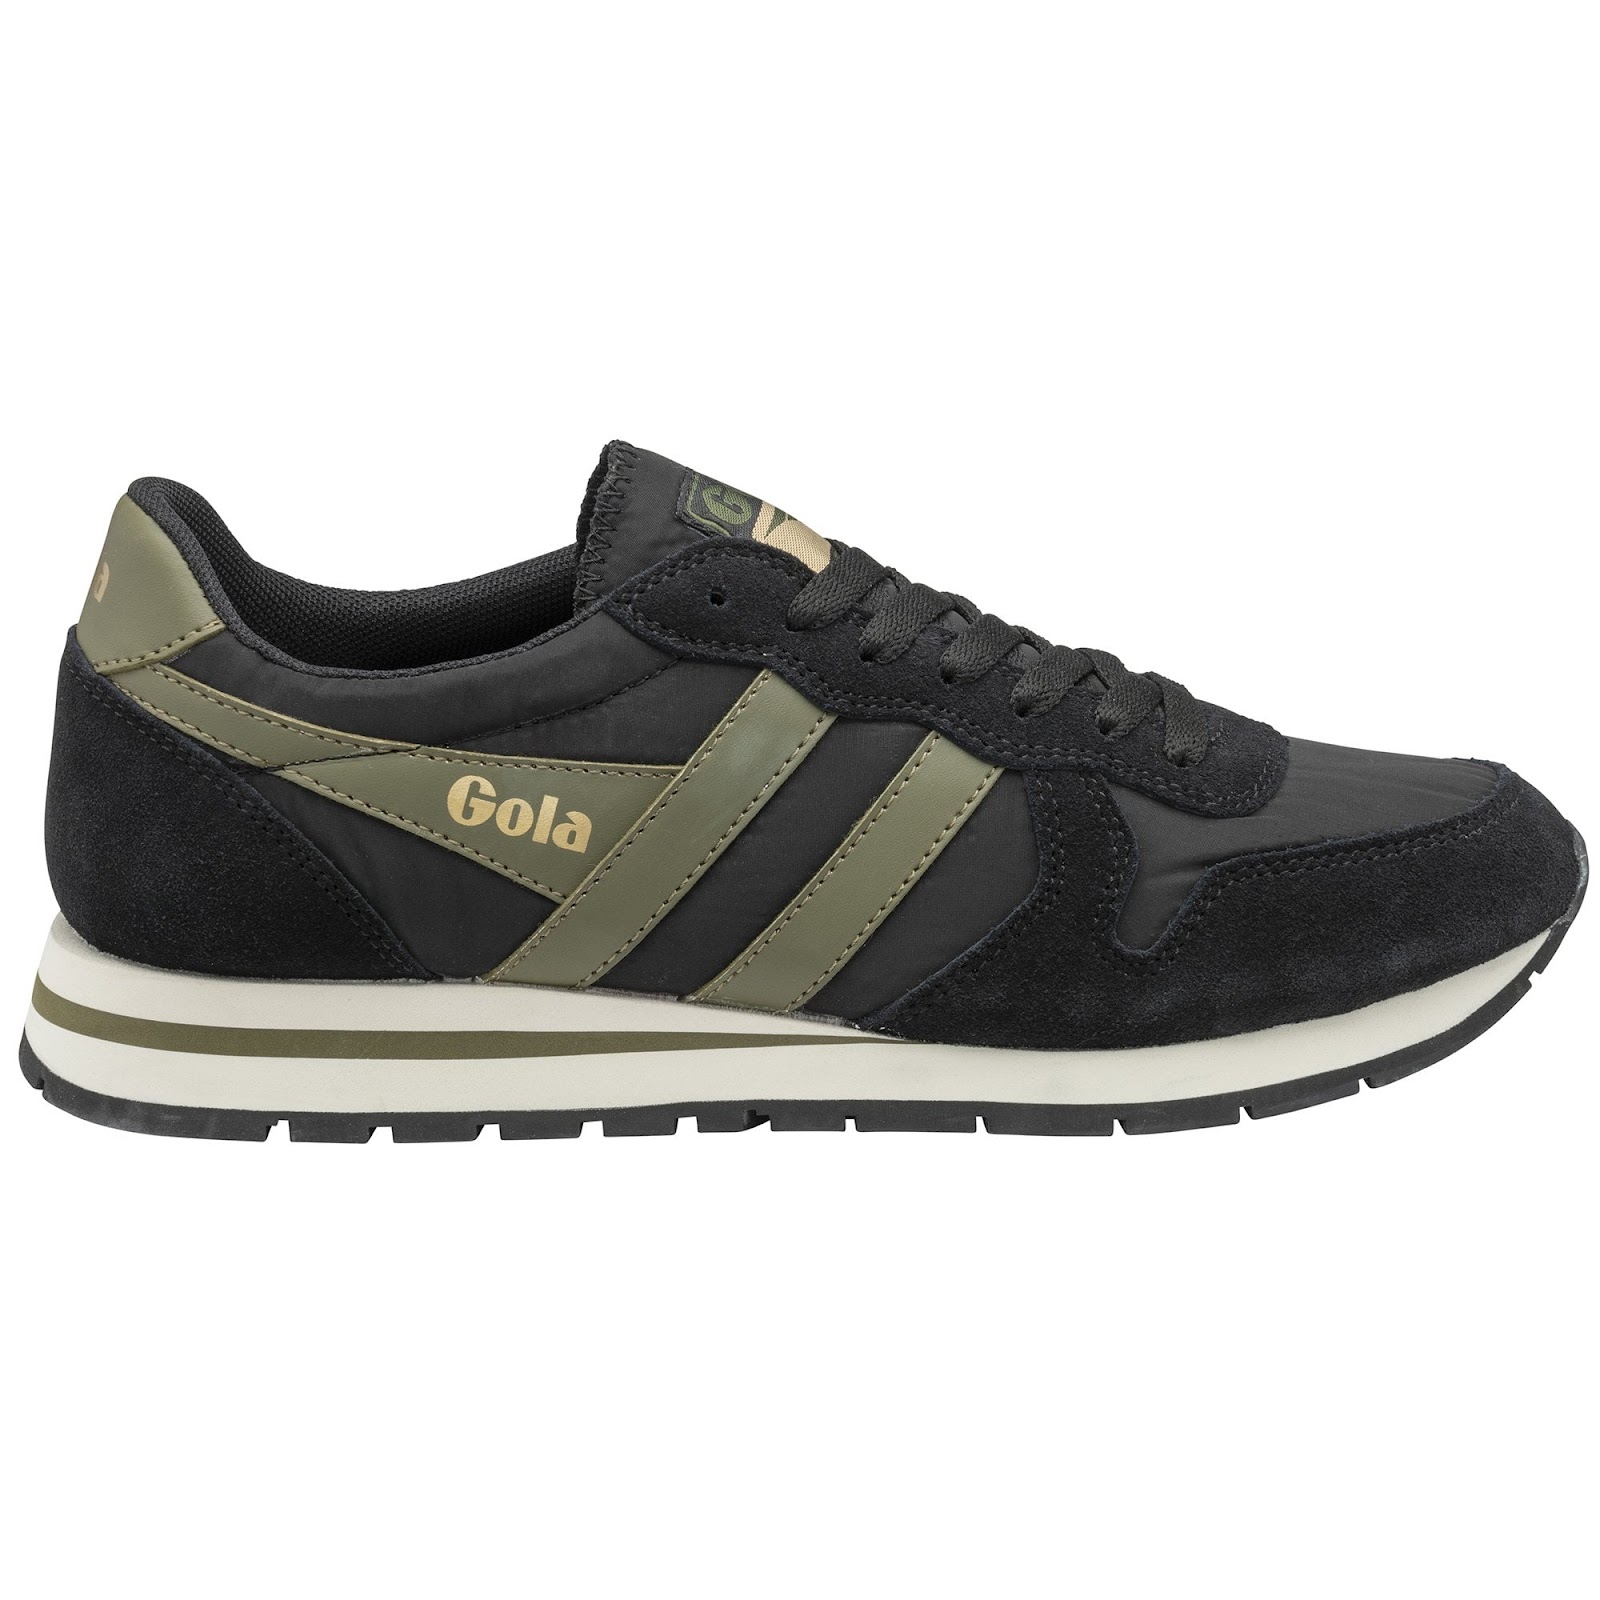 Low-top black men's Gola trainers with olive branding